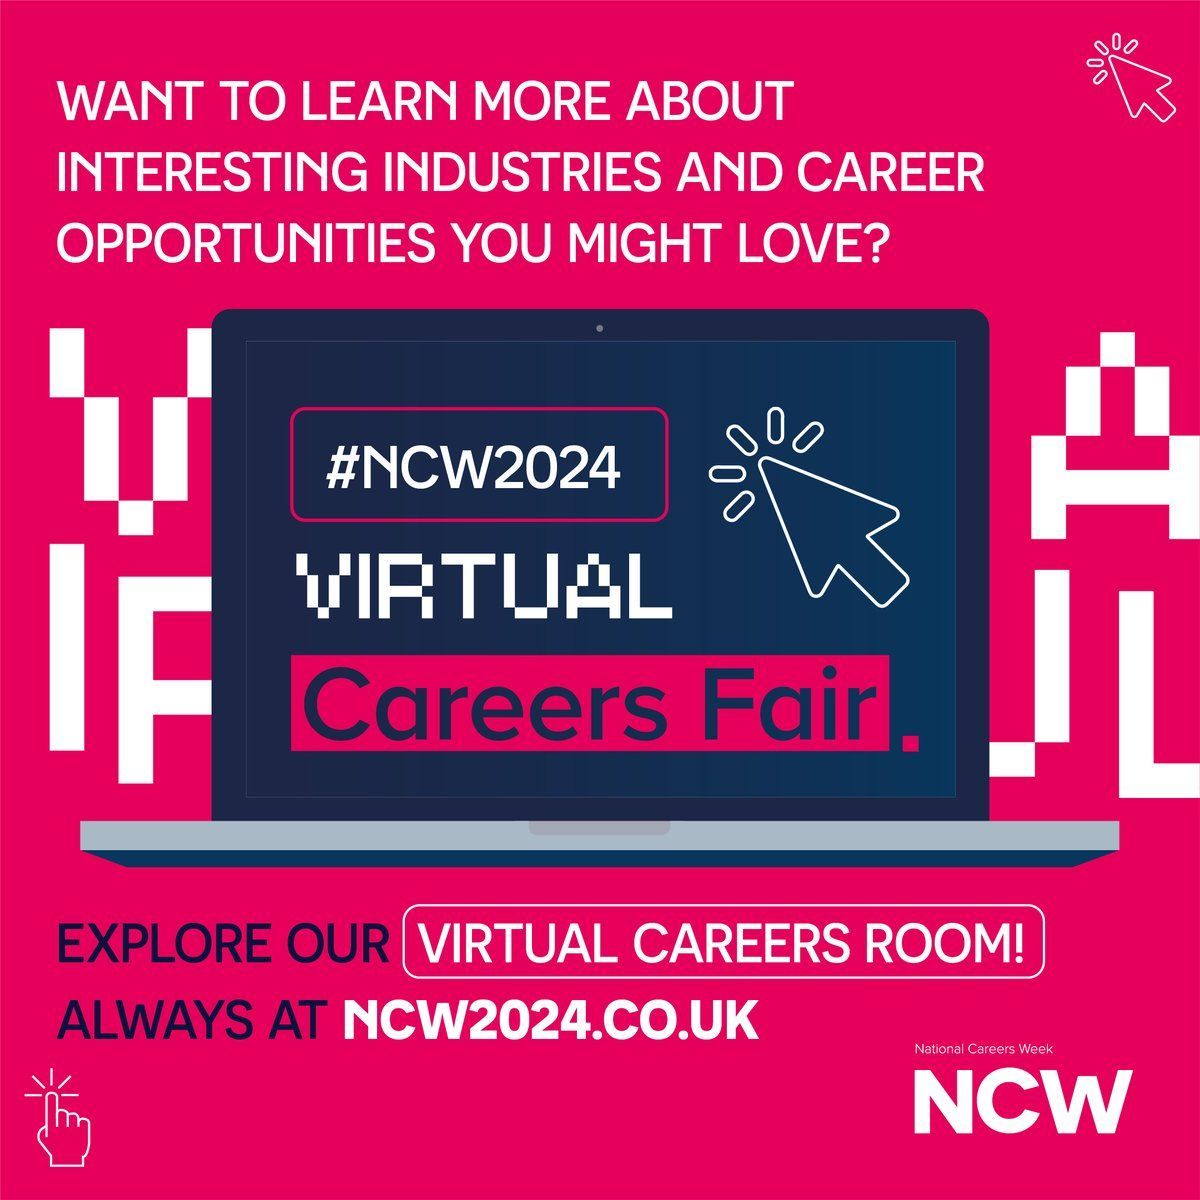 Want to learn more about interesting industries and #career opportunities you might love?

📢 Explore our 𝙑𝙞𝙧𝙩𝙪𝙖𝙡 𝘾𝙖𝙧𝙚𝙚𝙧𝙨 𝙁𝙖𝙞𝙧 

➡️ buff.ly/3Q8pCea

#Careers
#NCW2024